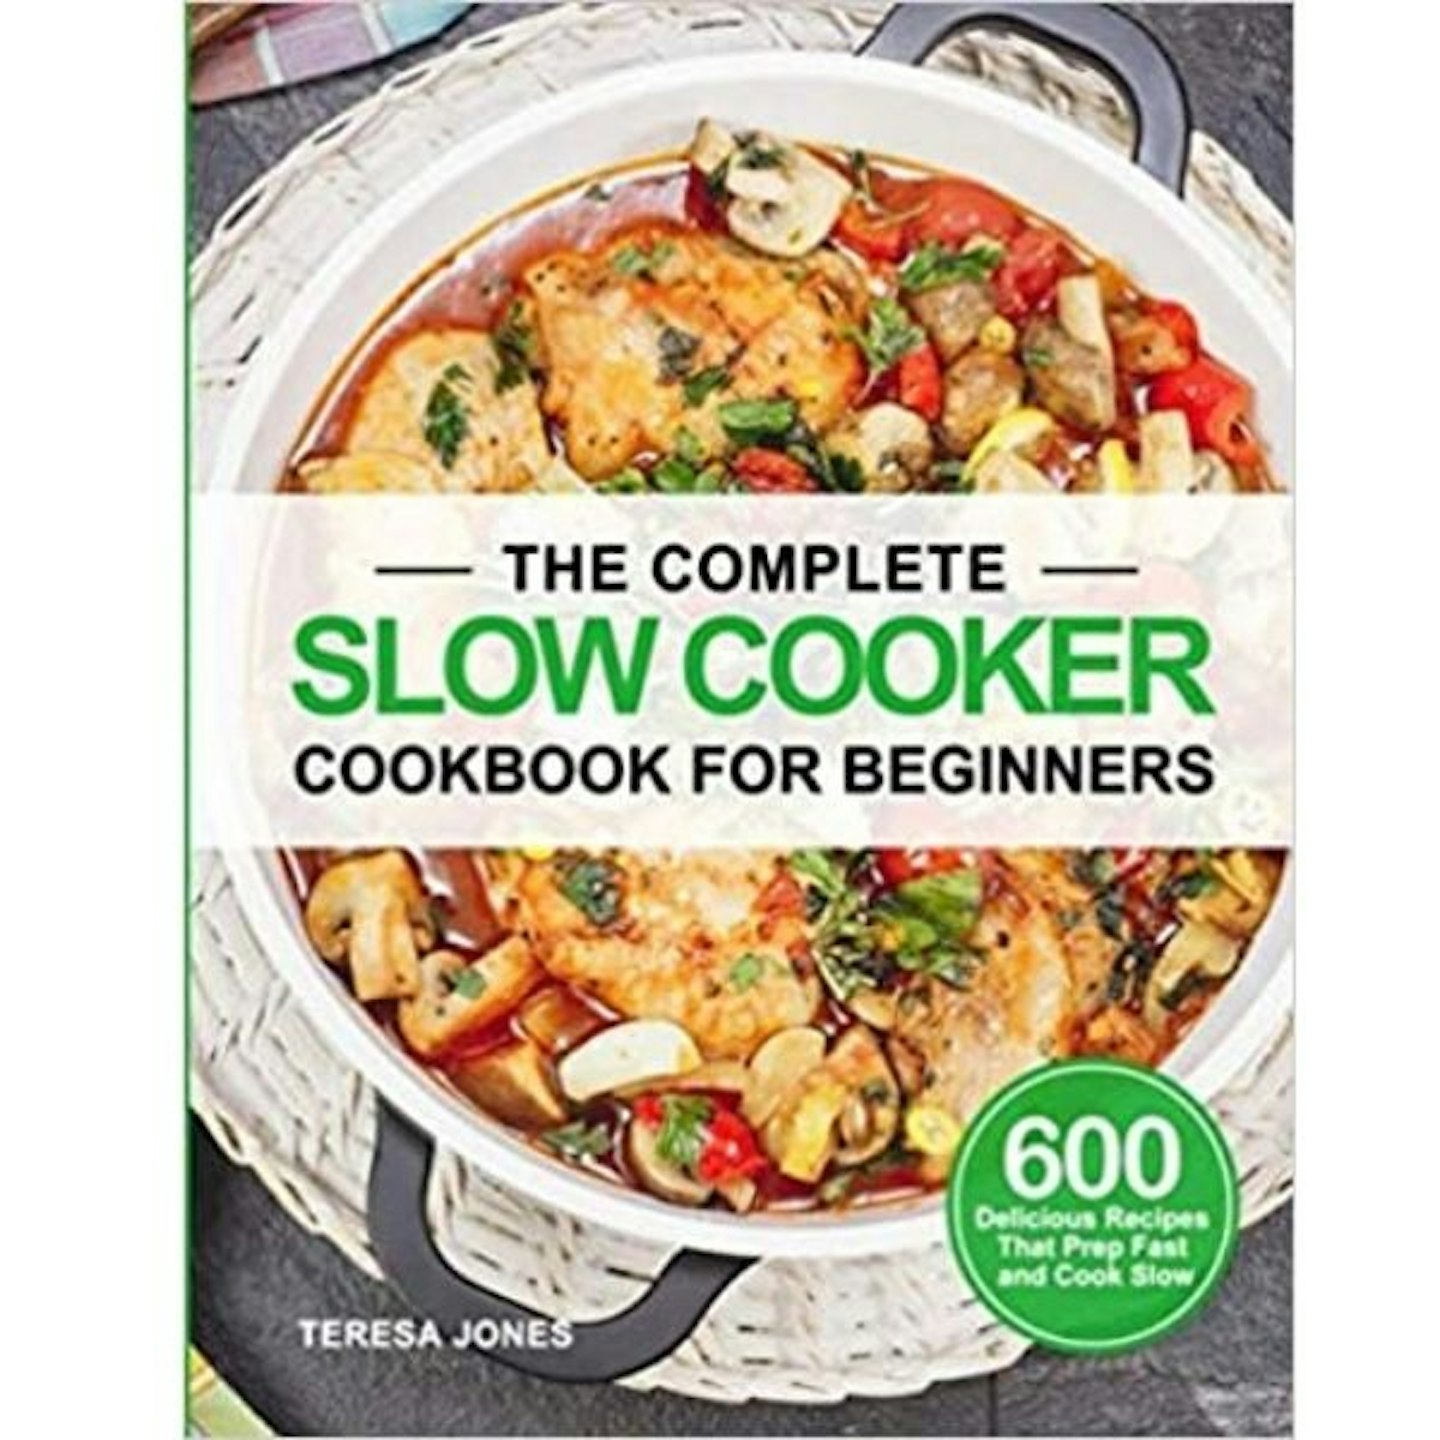 The Complete Slow Cooker Cookbook for Beginners: 600 Delicious Recipes That Prep Fast and Cook Slow